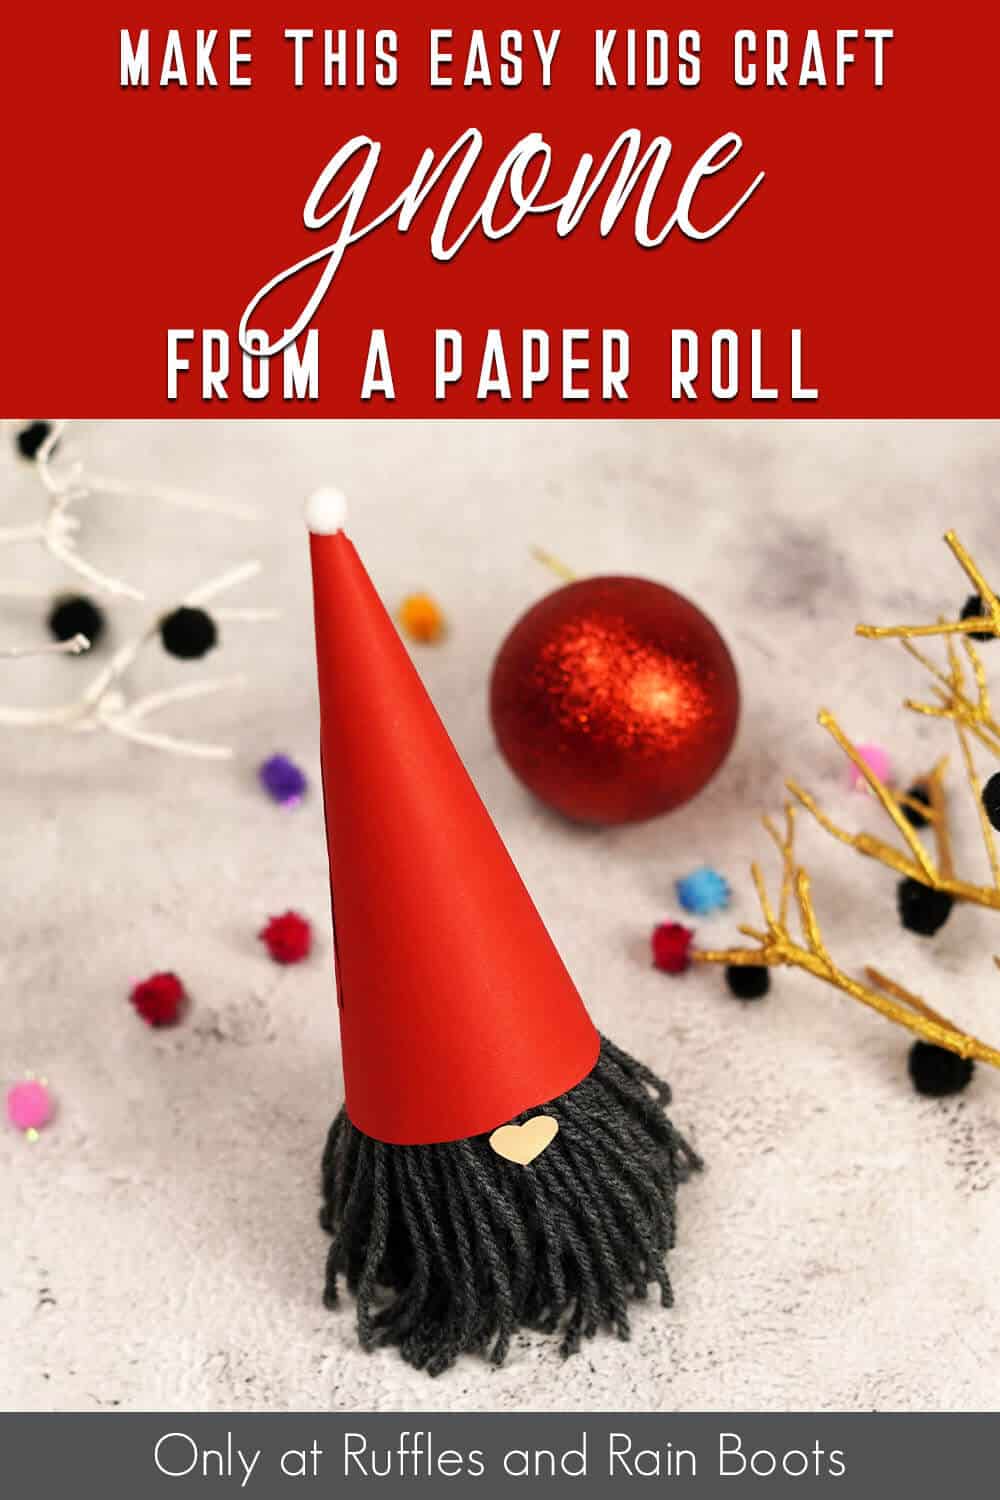 kids paper craft gnome with text which reads make this easy kids craft gnome from a paper roll